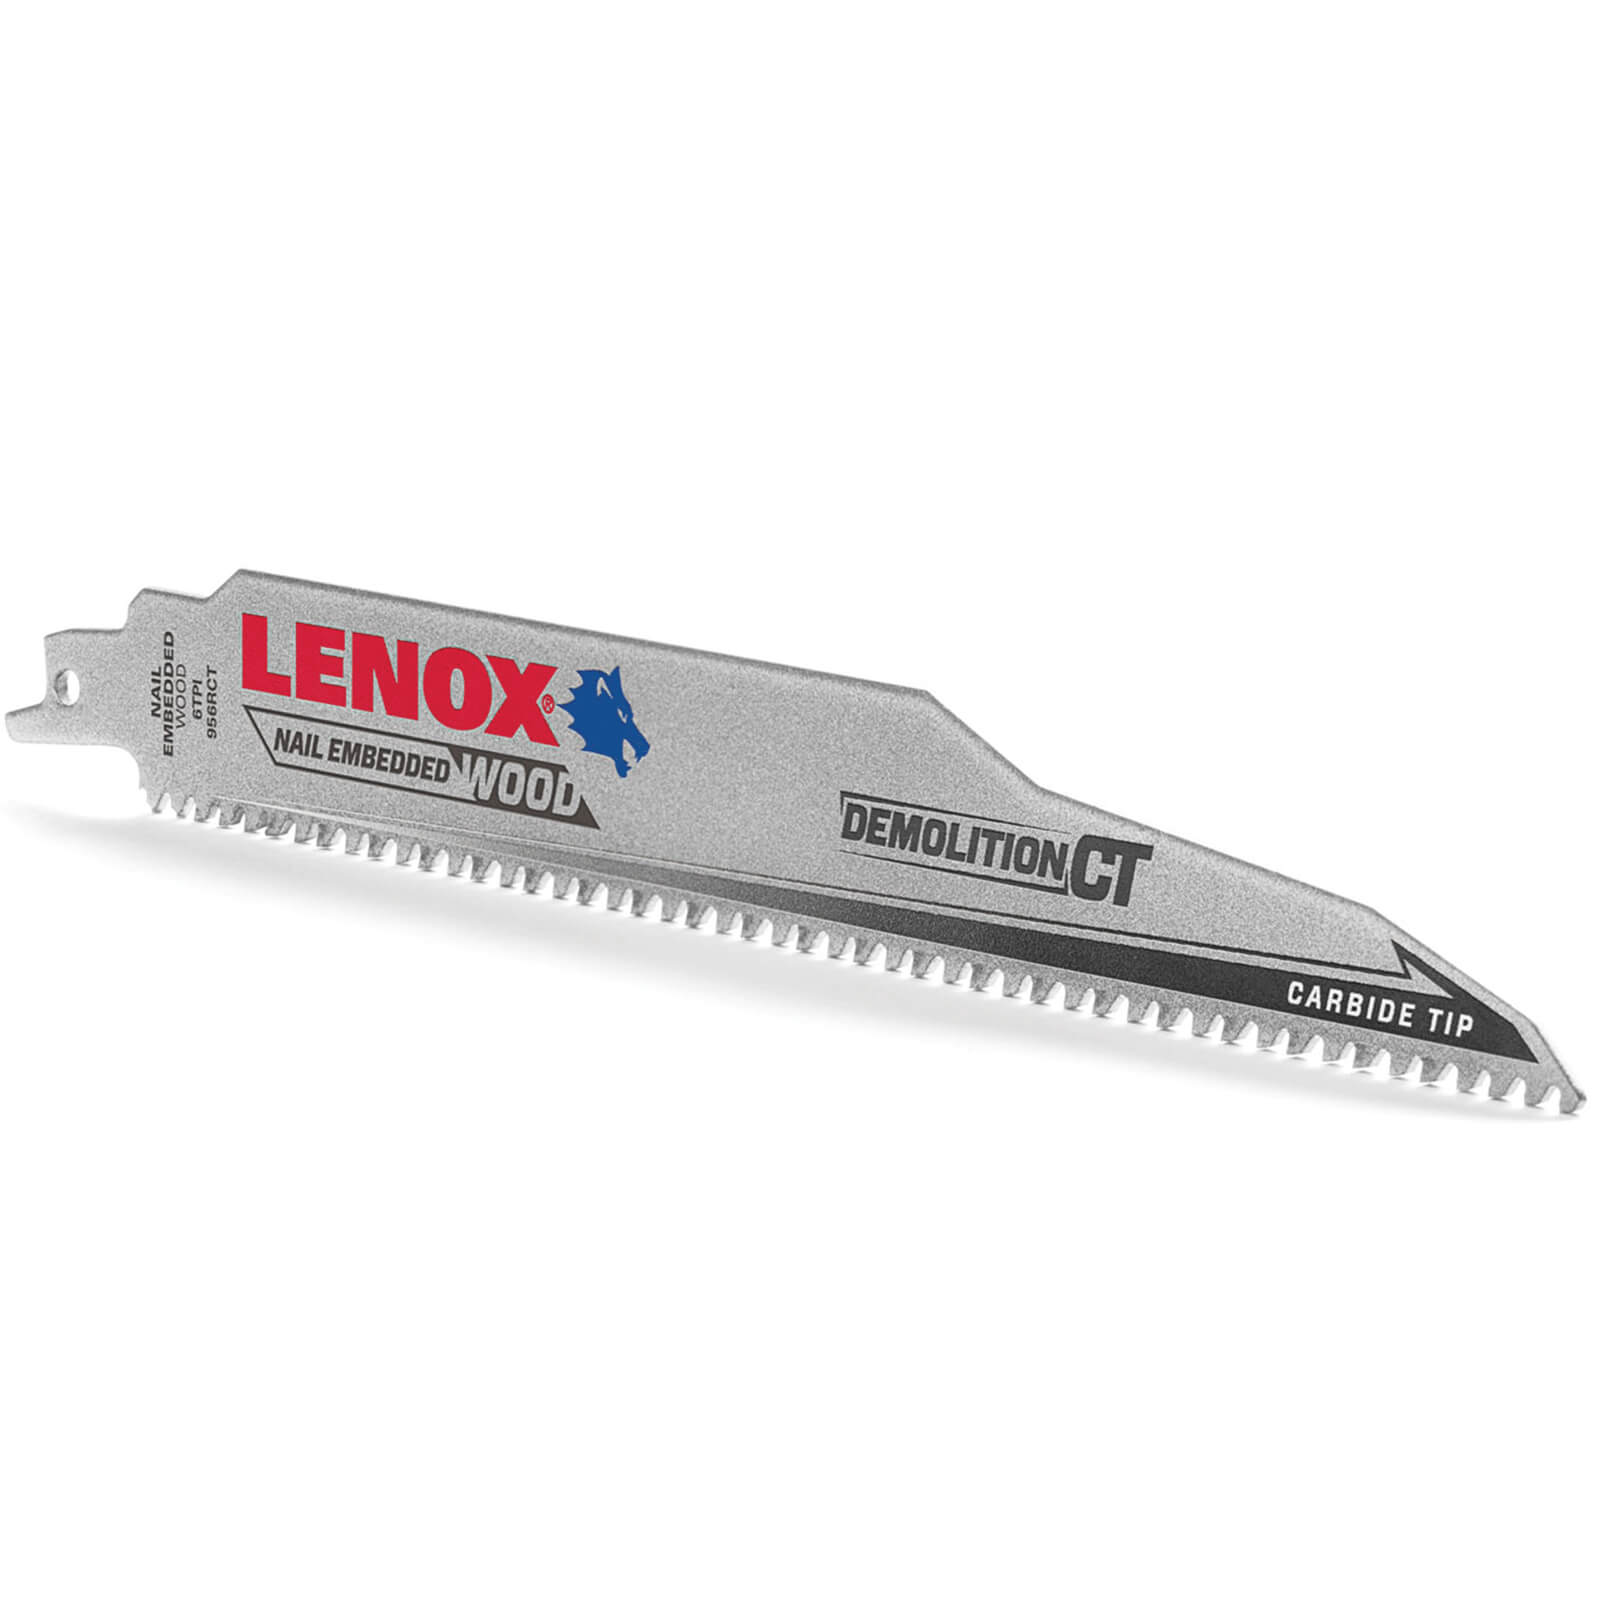 Image of Lenox CT Carbide Tipped Demolition Reciprocating Sabre Saw Blades 229mm Pack of 1